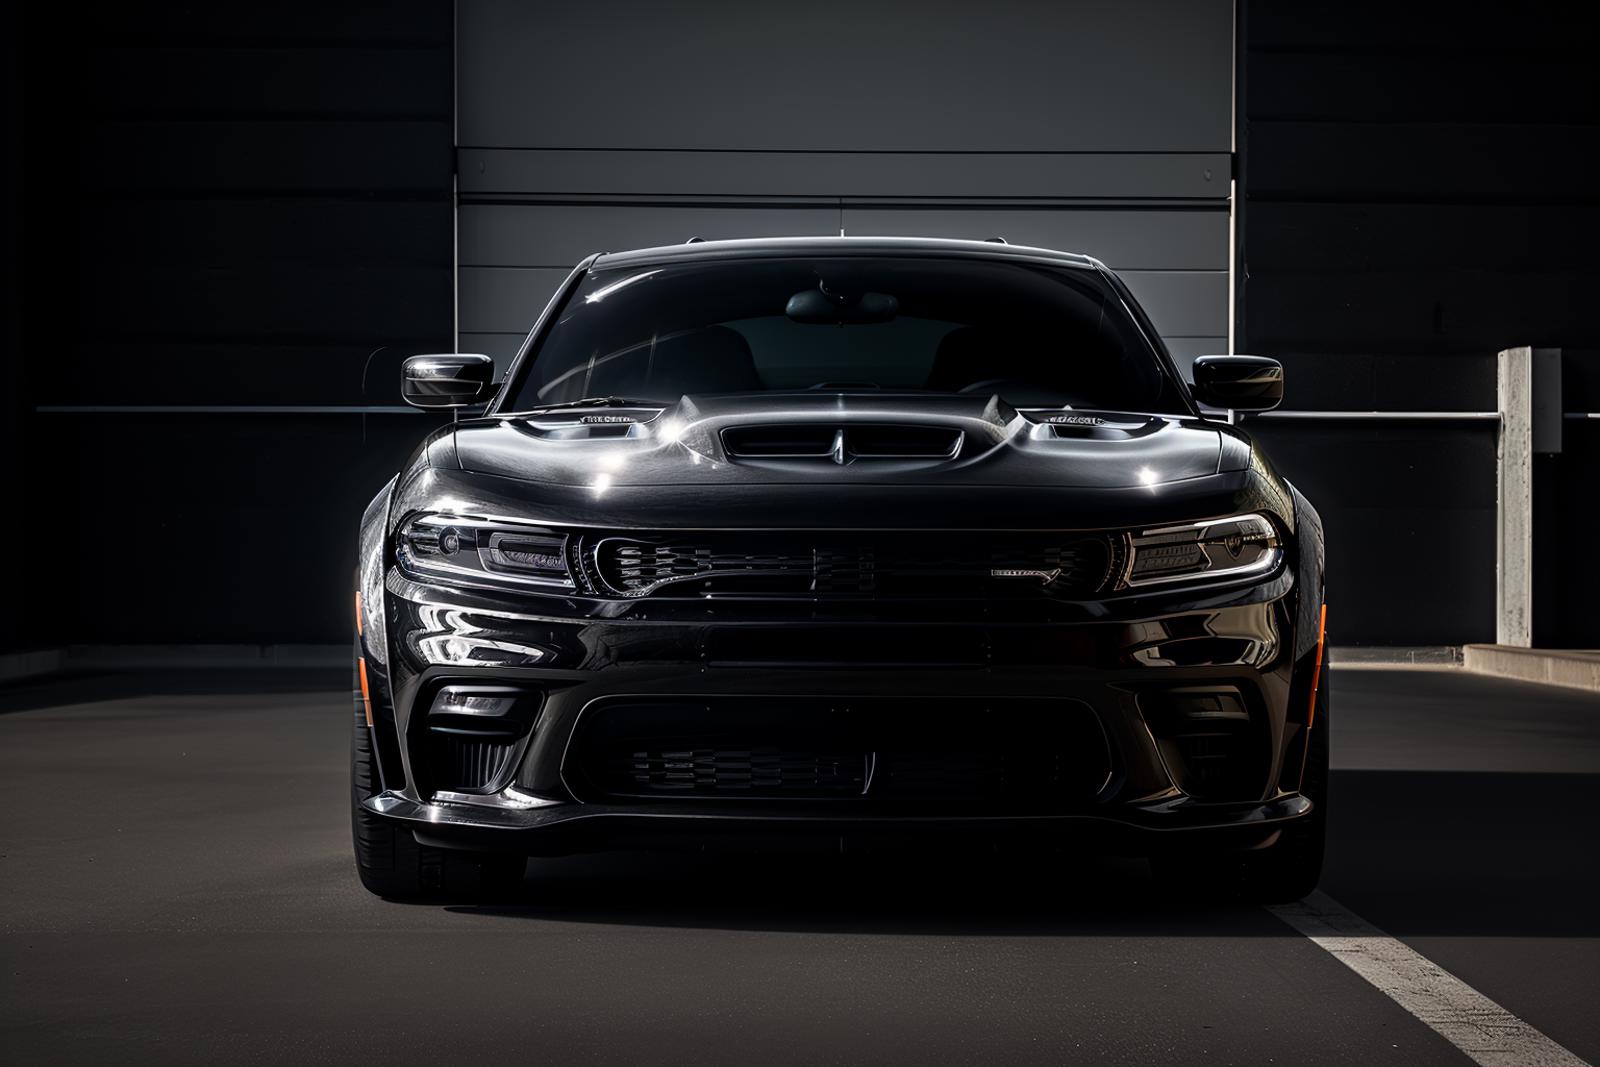 Dodge Charger SRT Hellcat image by dbst17